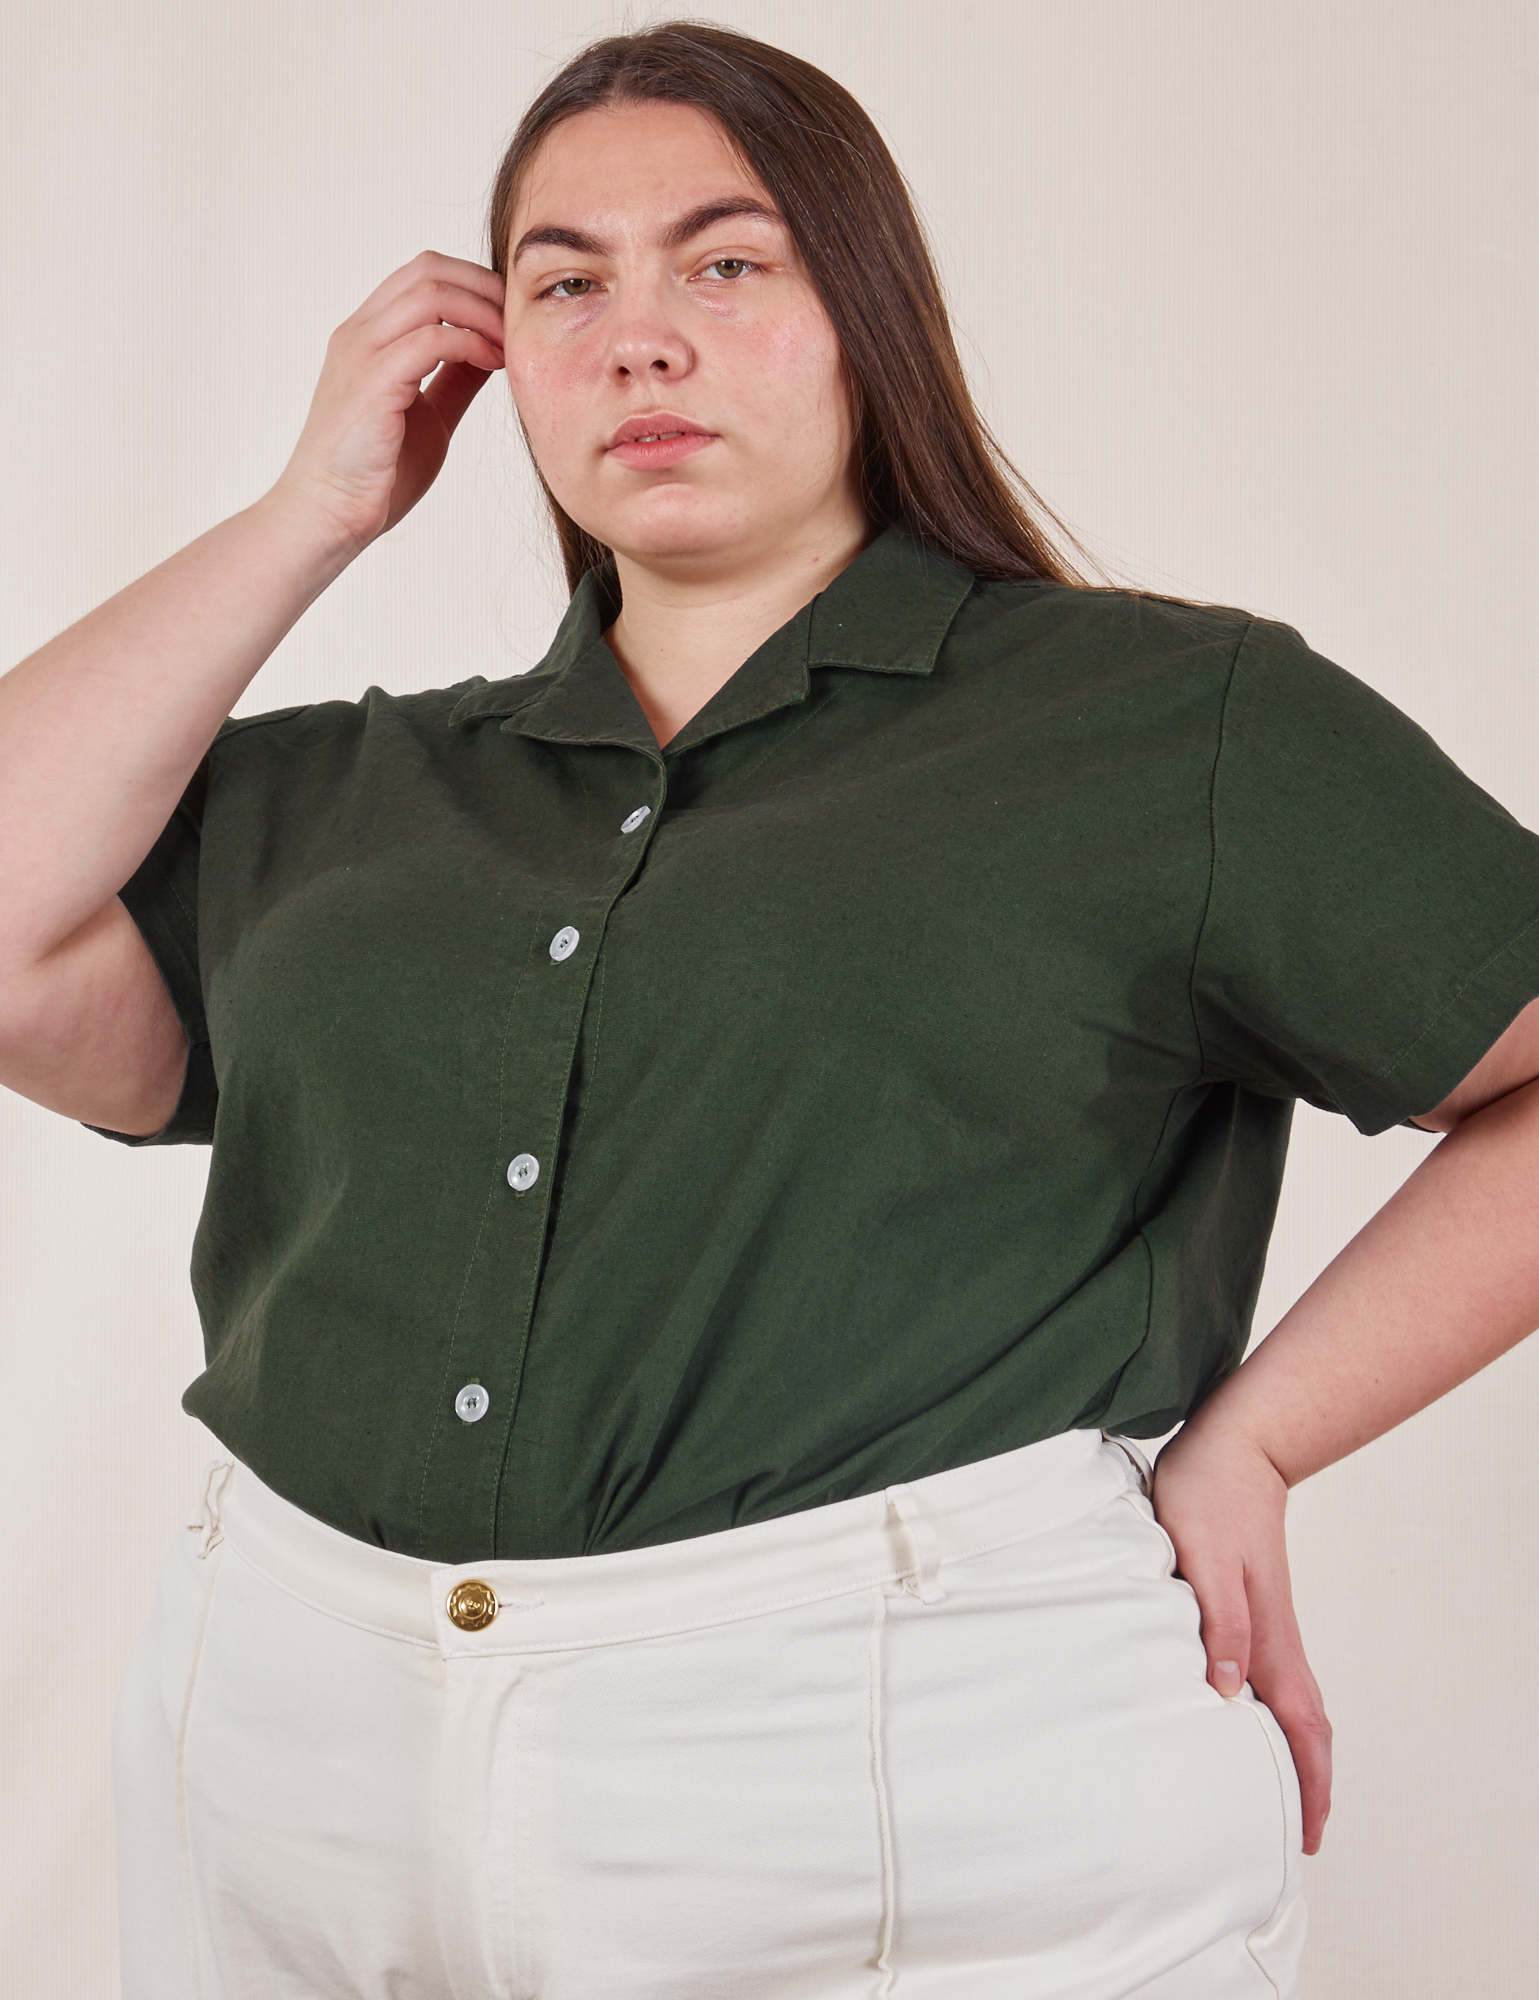 Marielena is wearing Pantry Button-Up in Swamp Green tucked into vintage tee off-white Western Pants